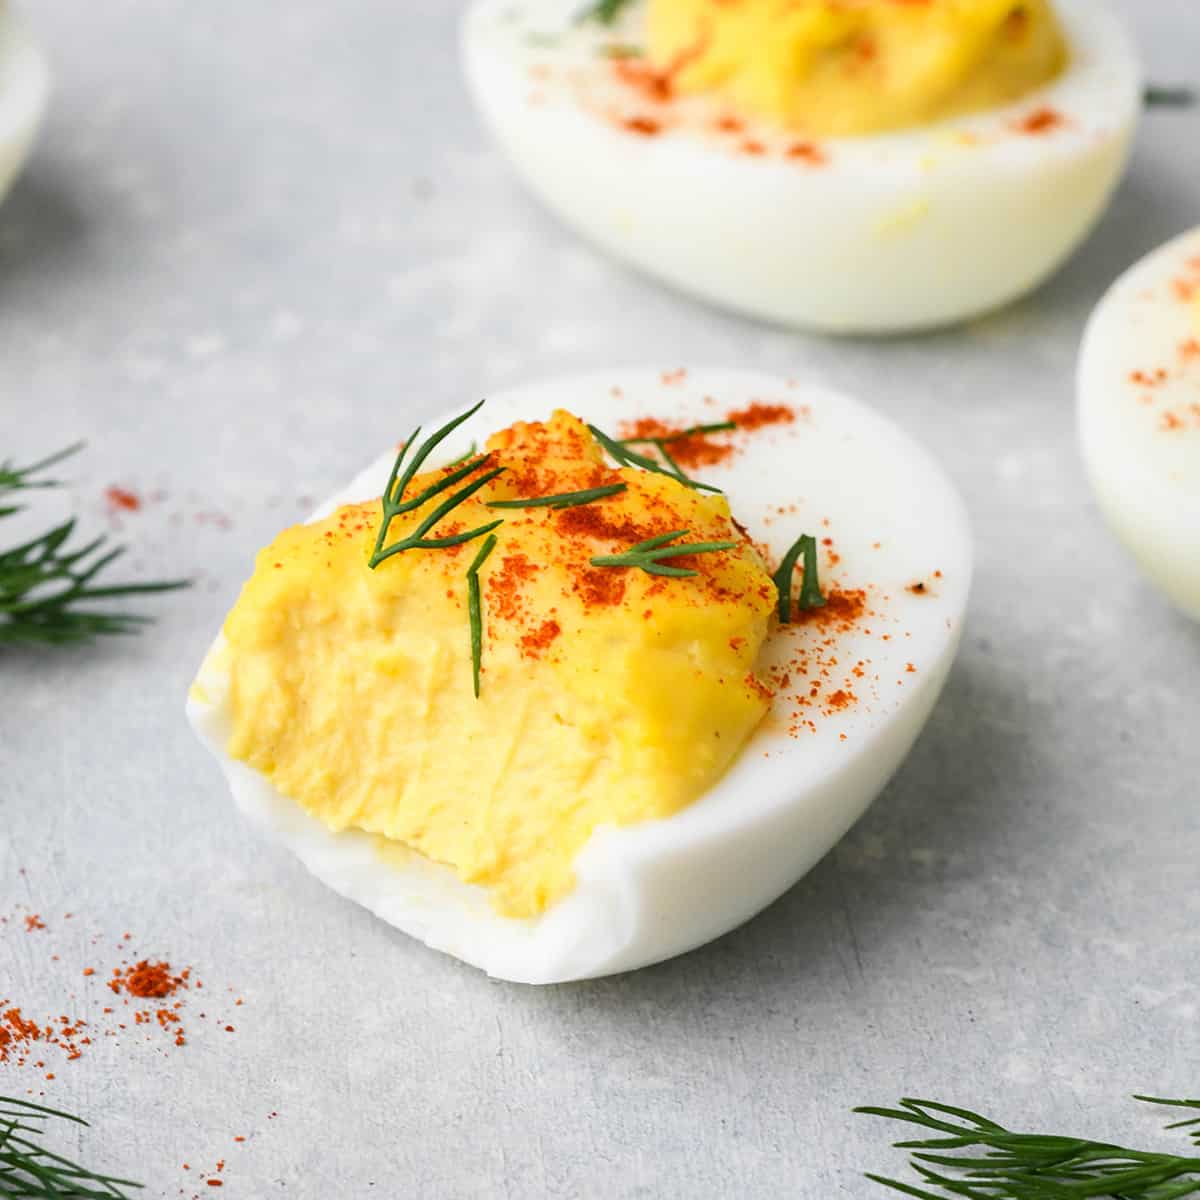 a deviled egg with a bite taken out of it garnished with dill and paprika